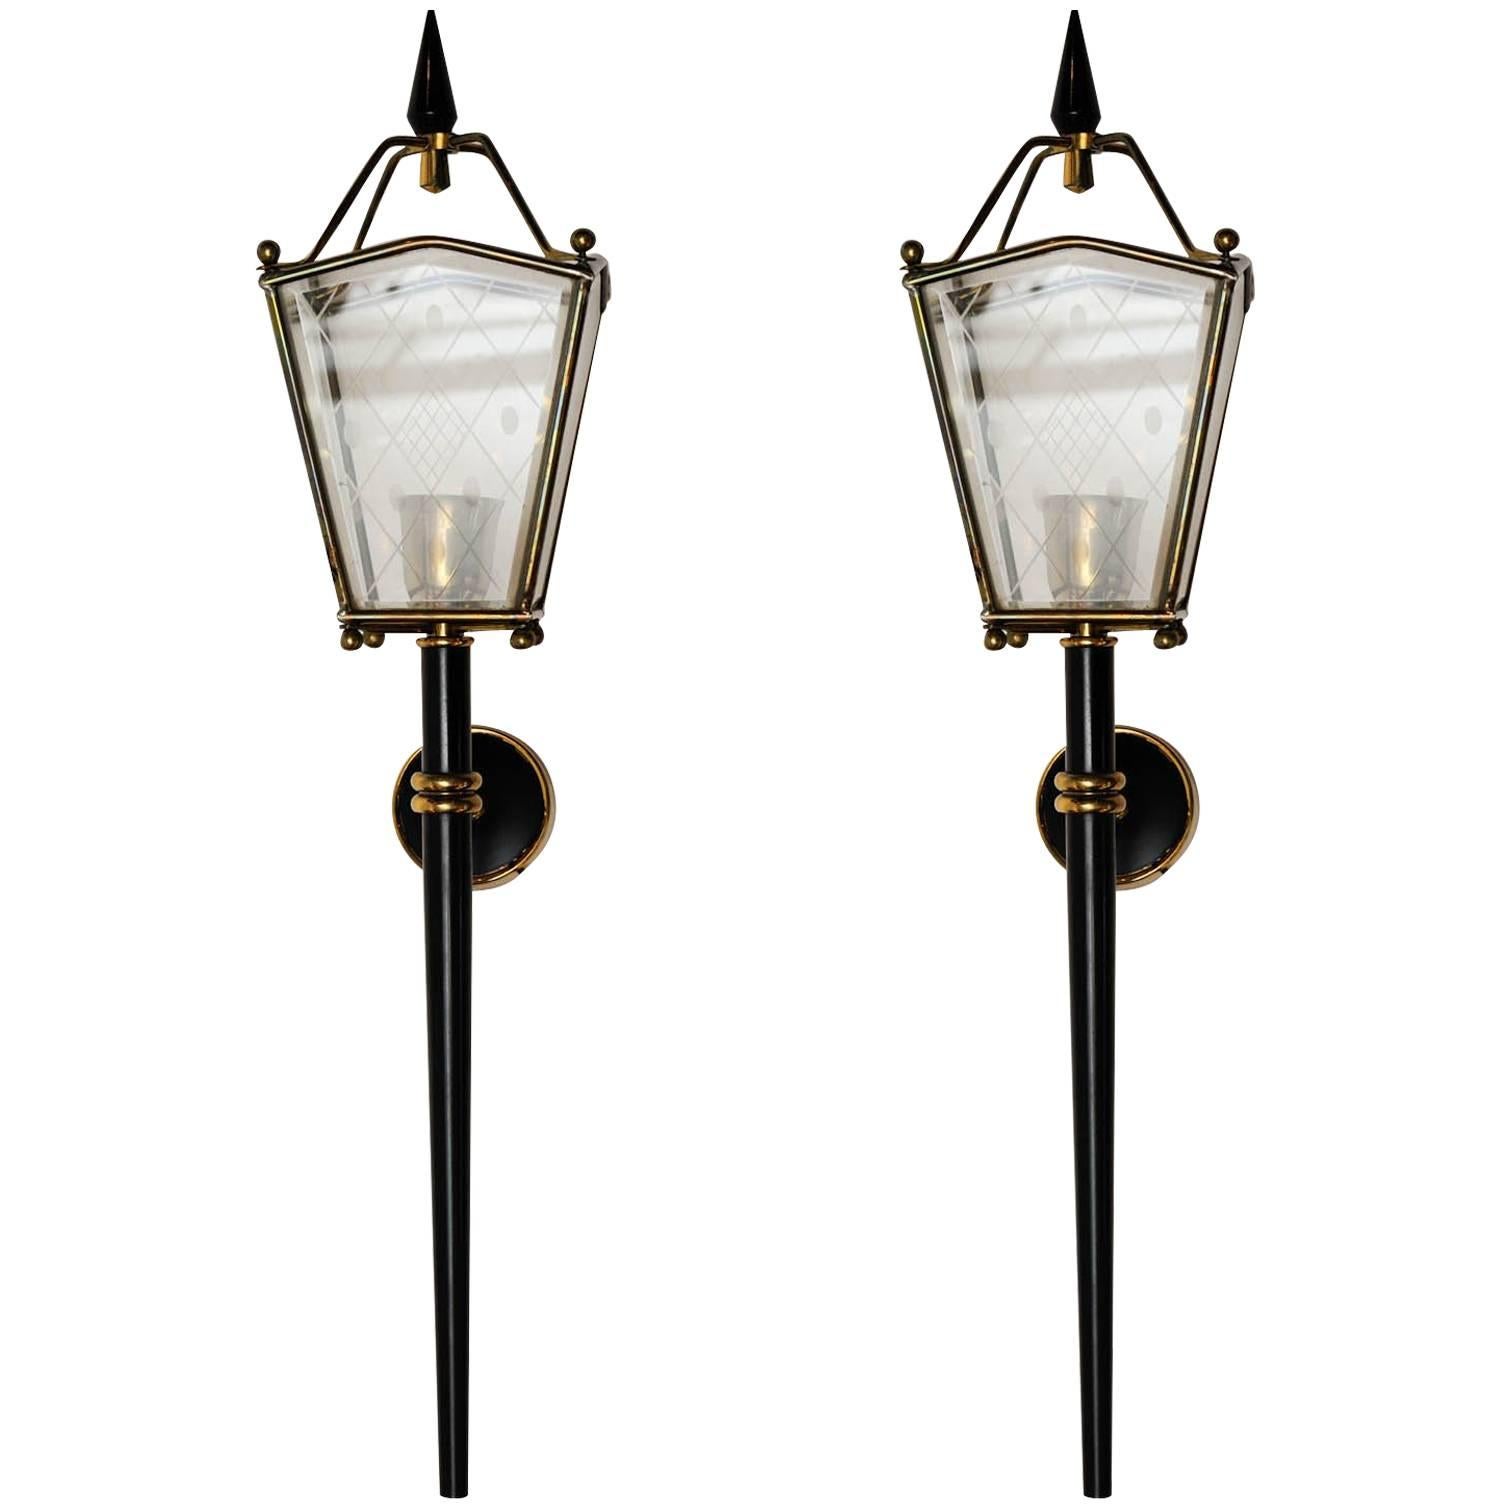 Pair of Black Metal, Brass and Glass Lantern Wall Sconces